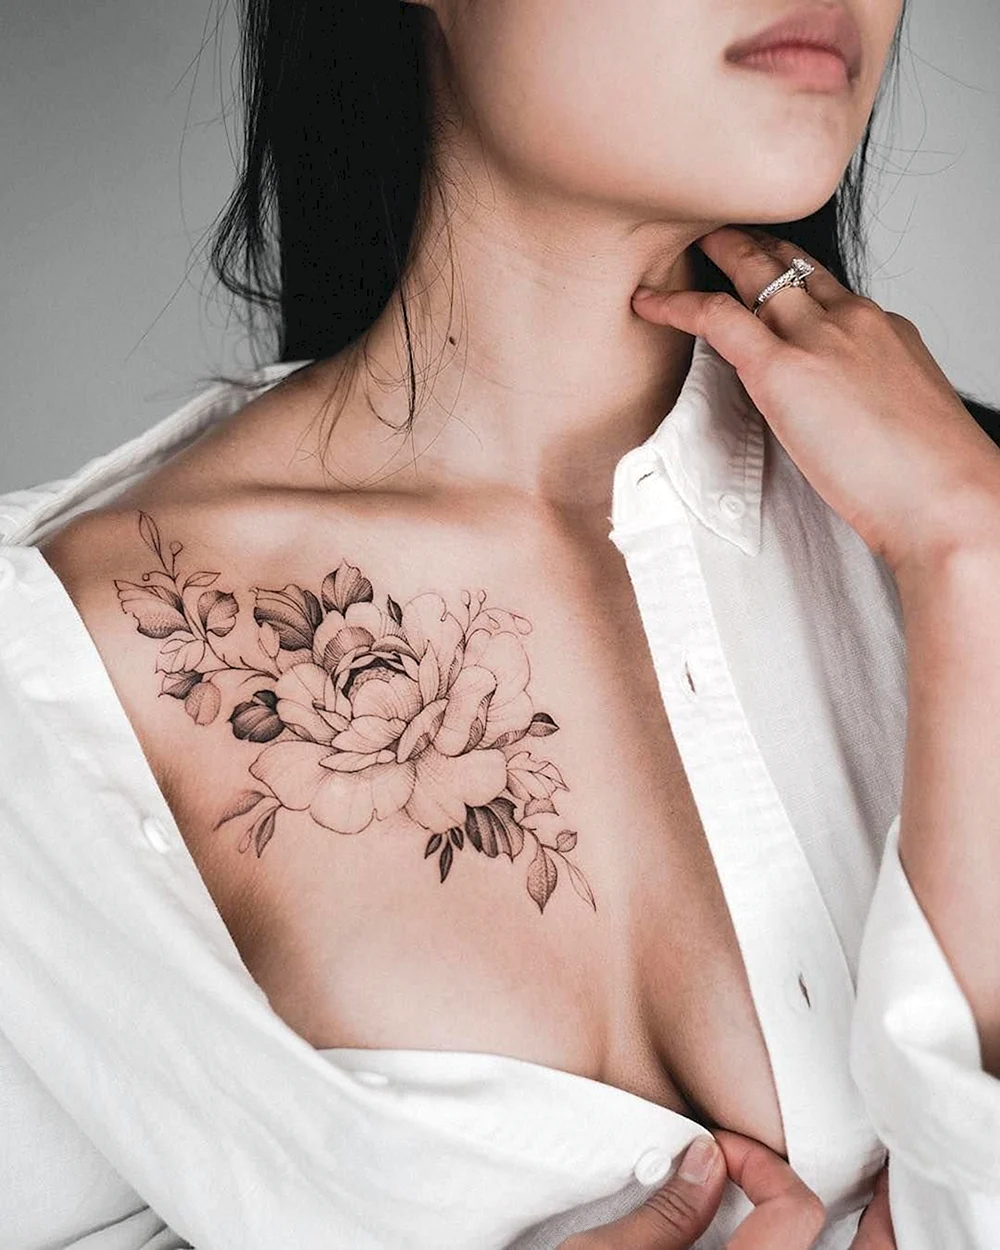 Tattoo on the woman Chest